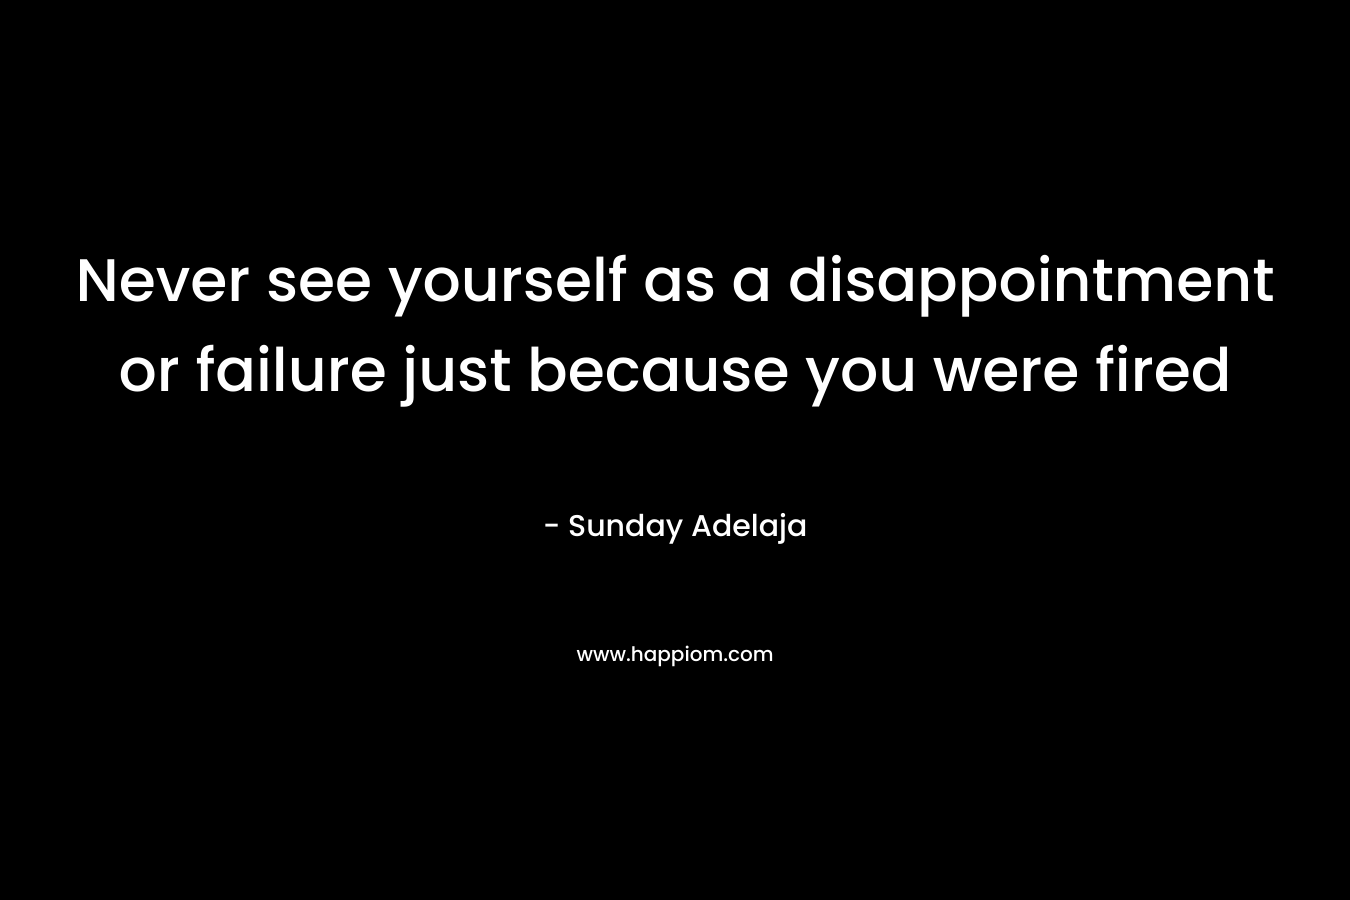 Never see yourself as a disappointment or failure just because you were fired